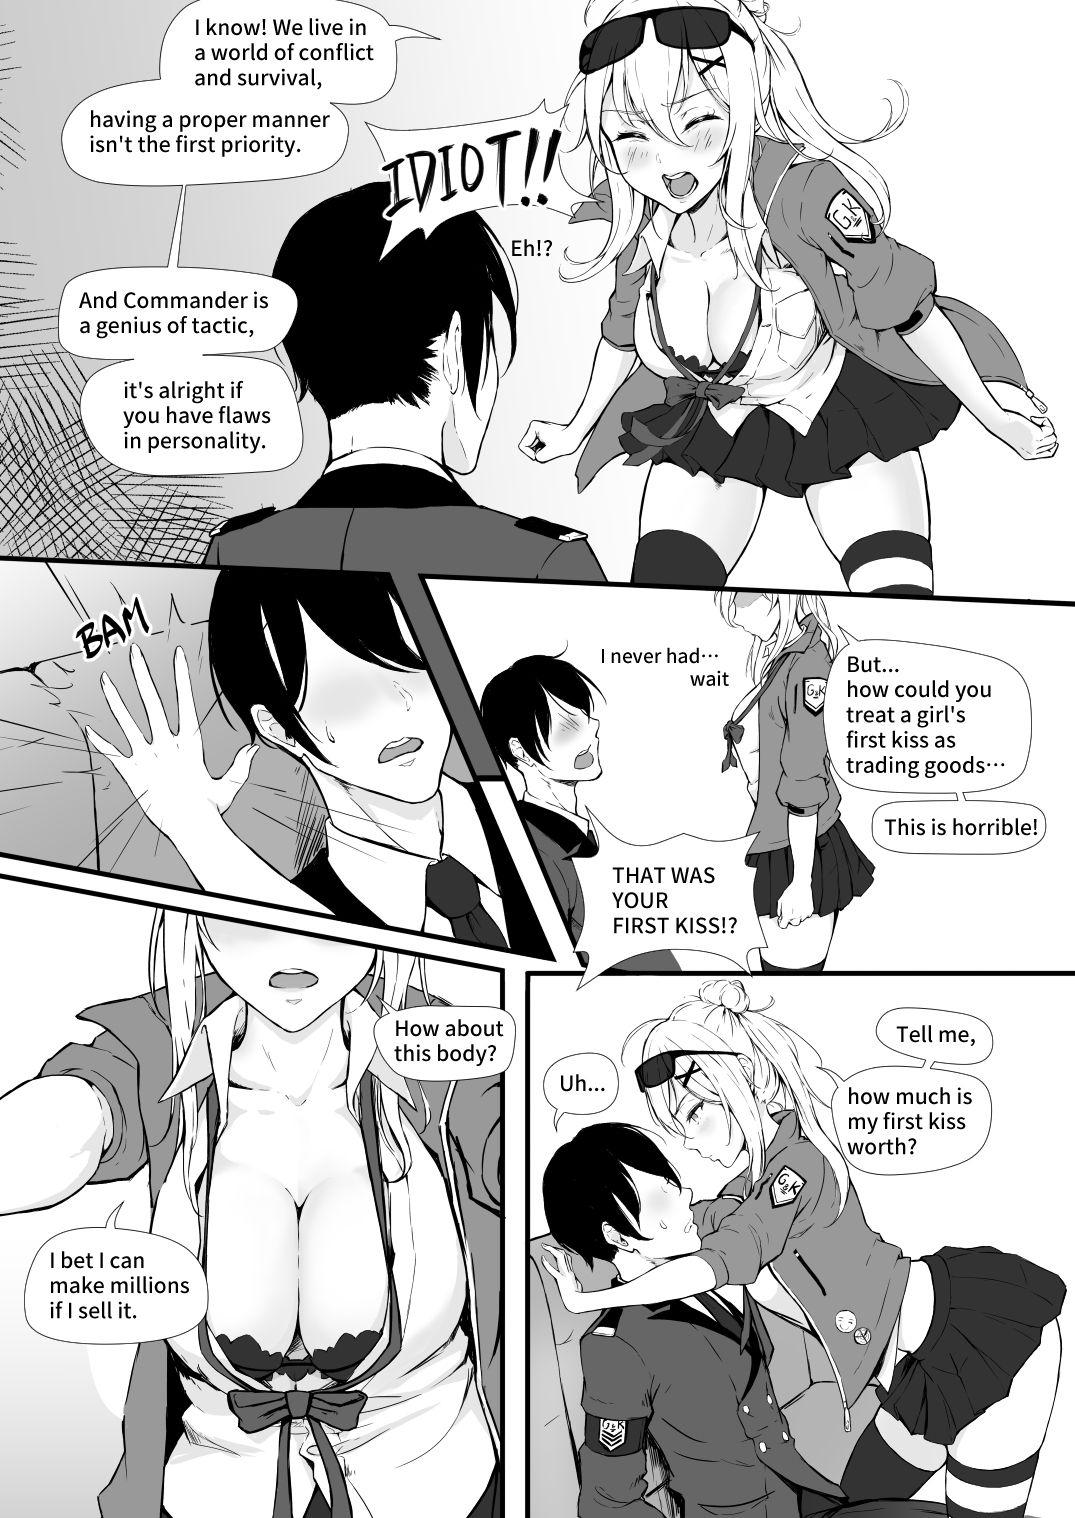 Spreading How Many Diamonds a Kiss Worth? - Girls frontline Jeans - Page 9